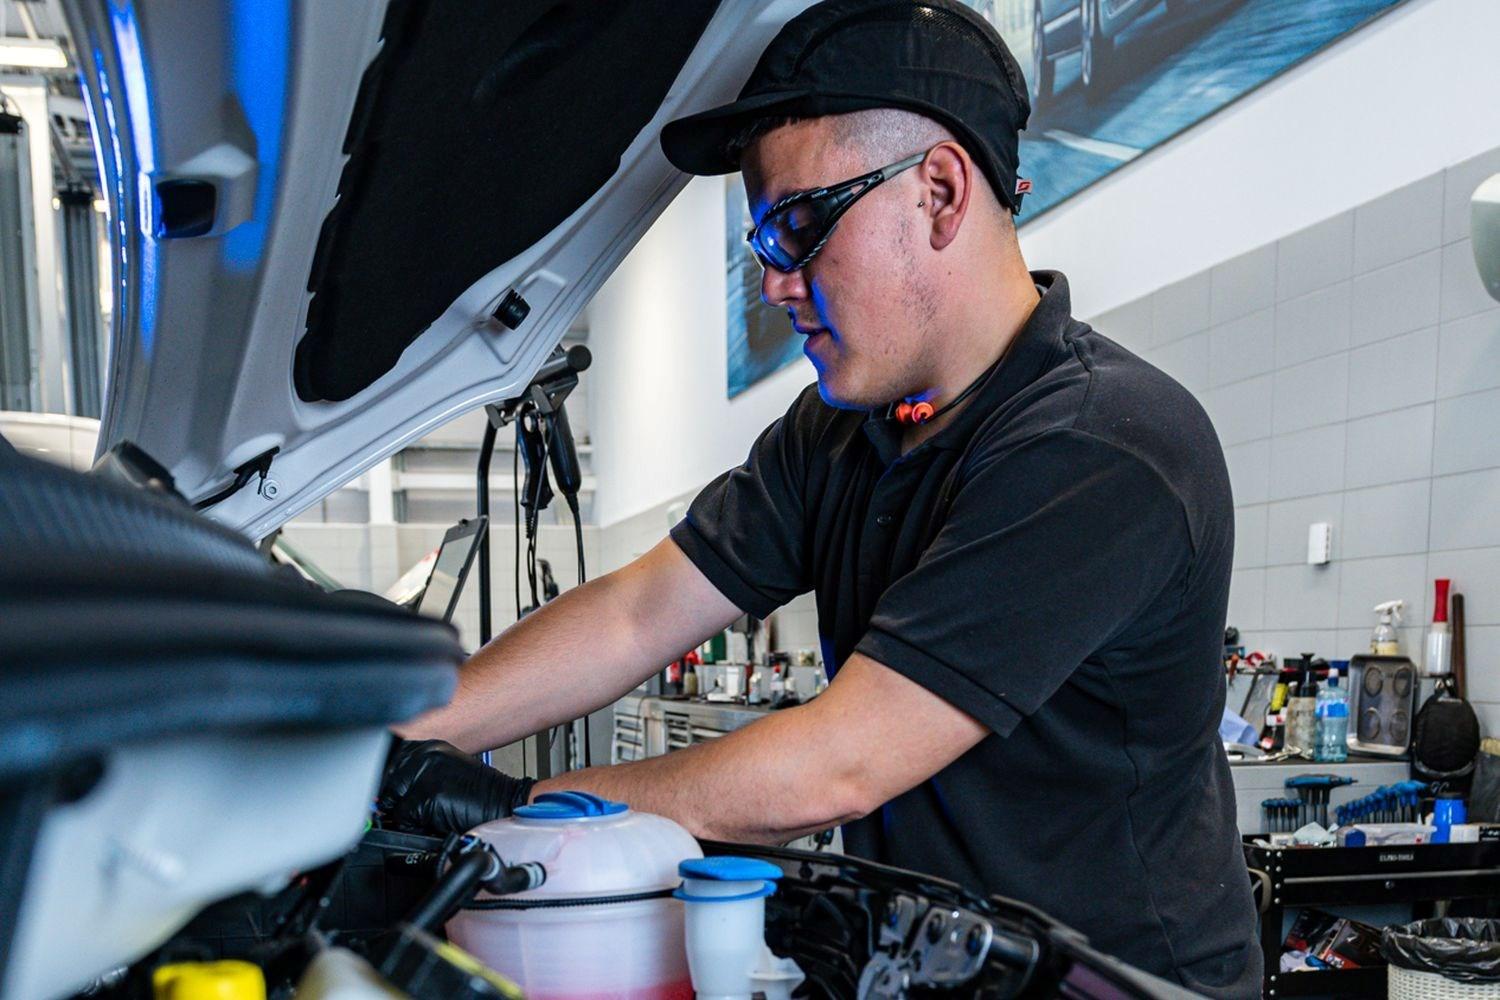 Volkswagen Commercial Vehicle Technician carrying out an interim service.